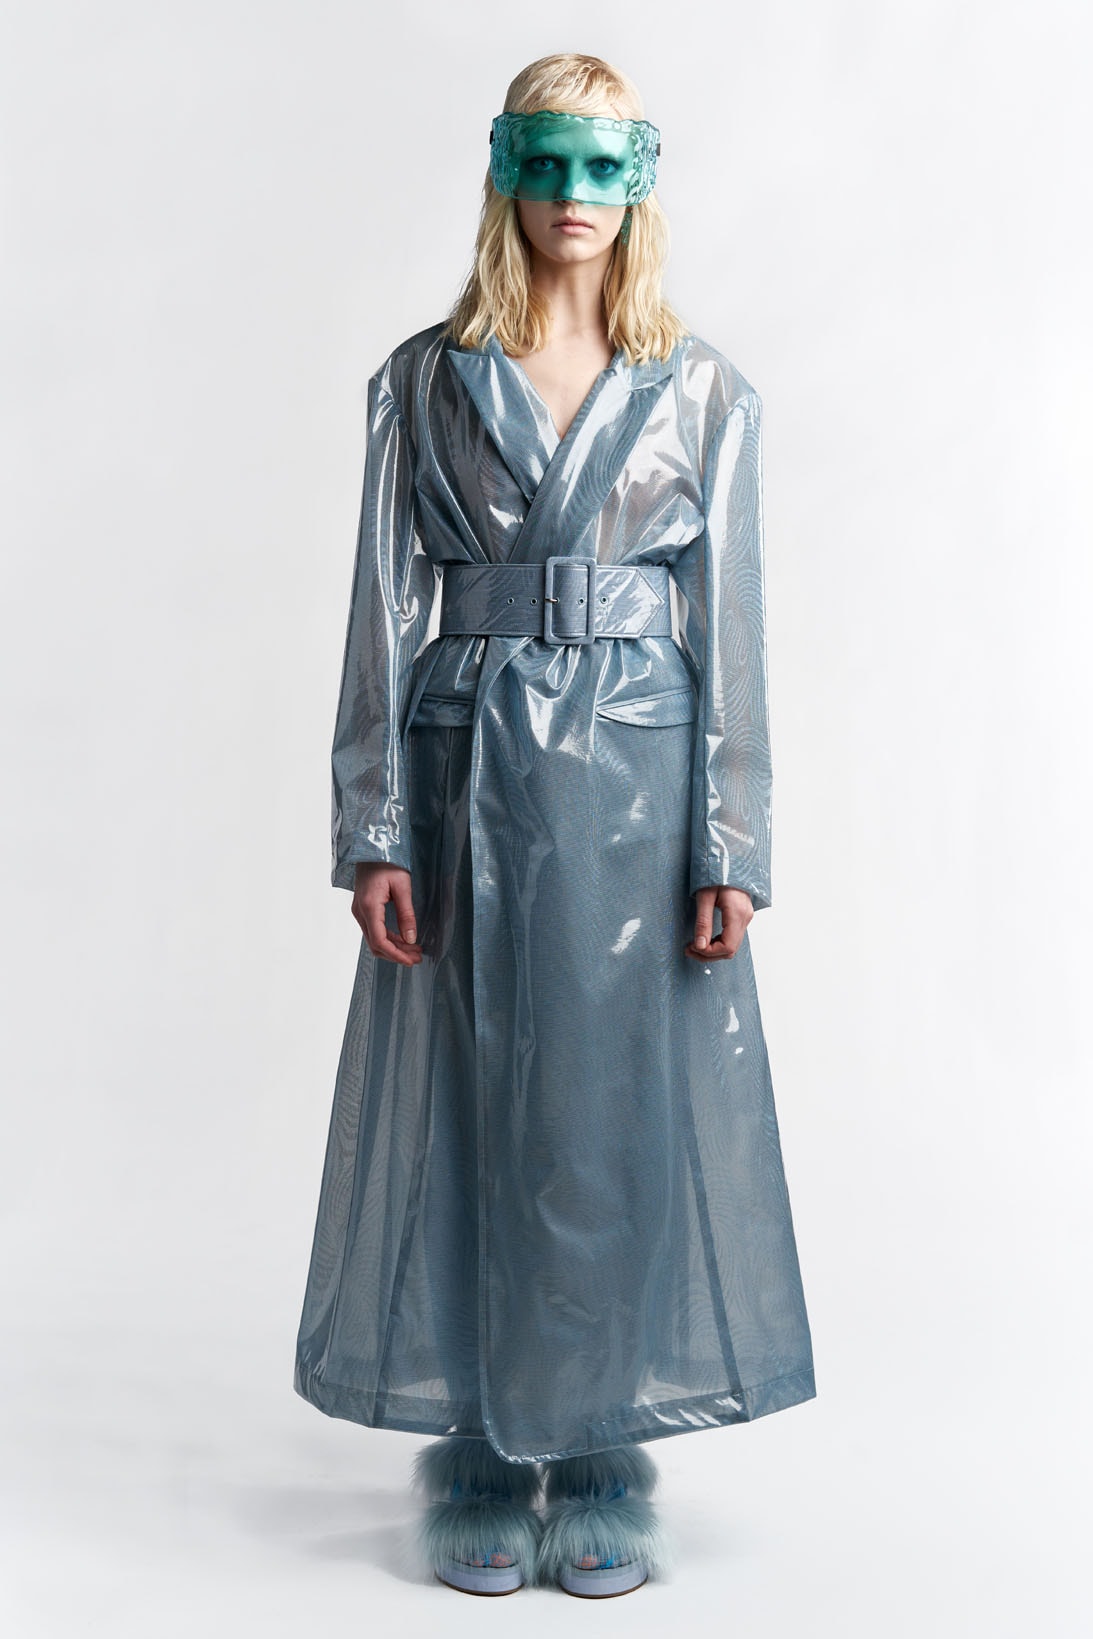 Maisie Wilen Presents Holographic FW22 Collection | Hypebae